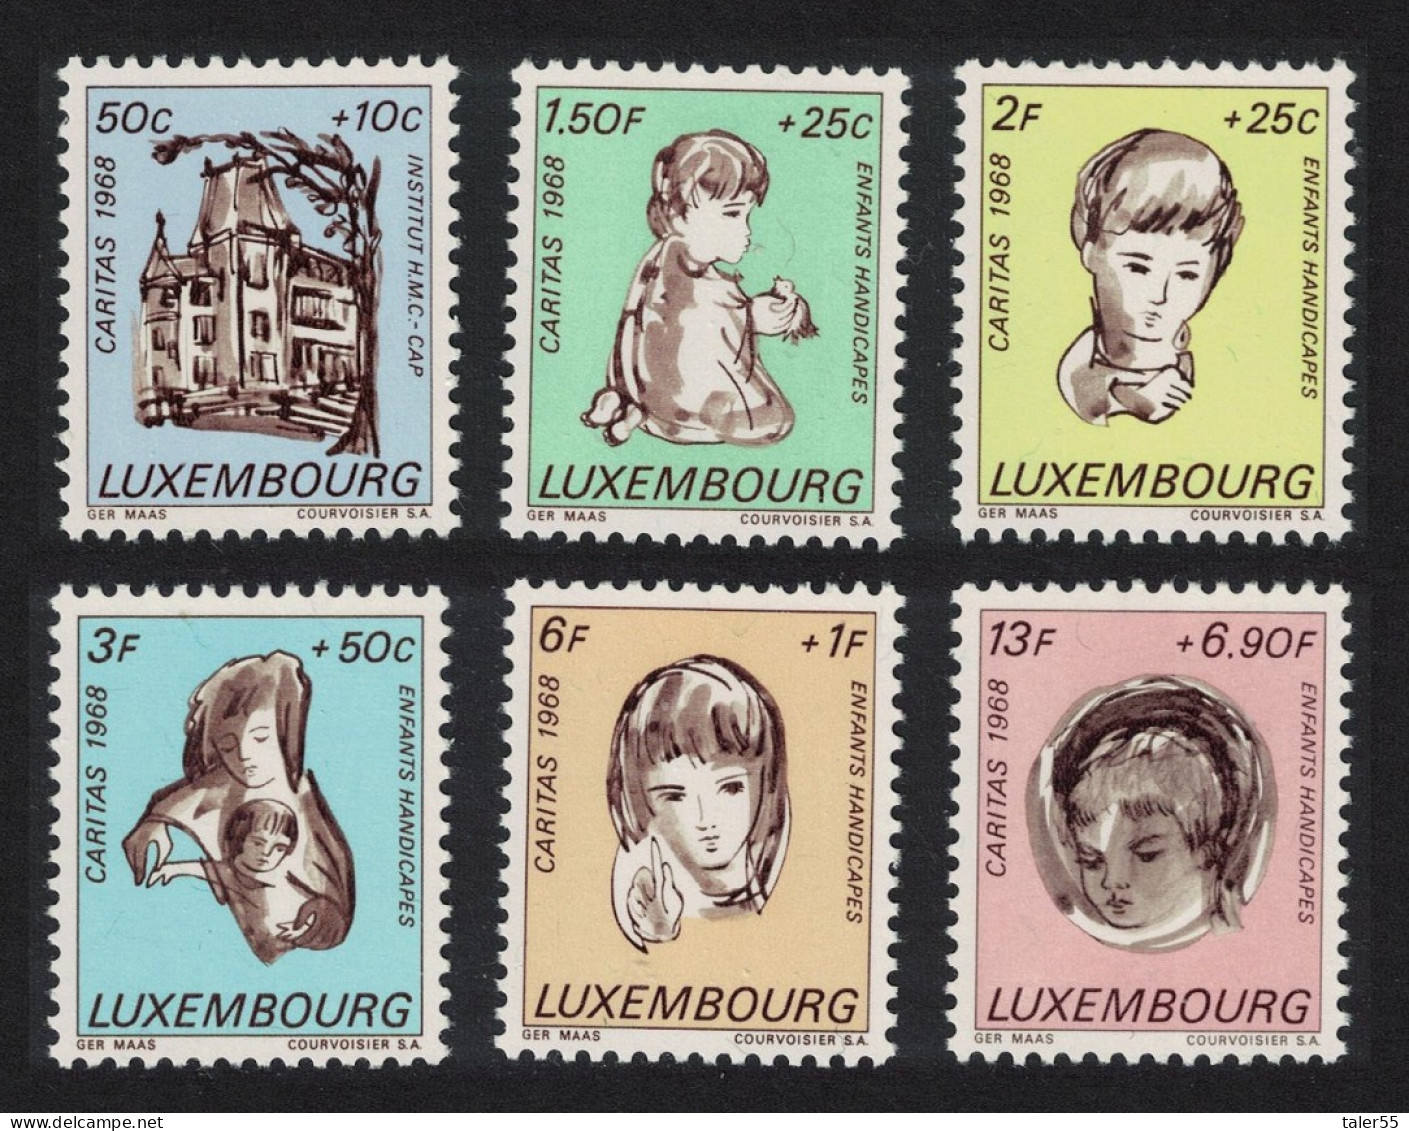 Luxembourg Christmas Disabled Children 6v 1968 MNH SG#829-834 MI#779-784 - Nuevos